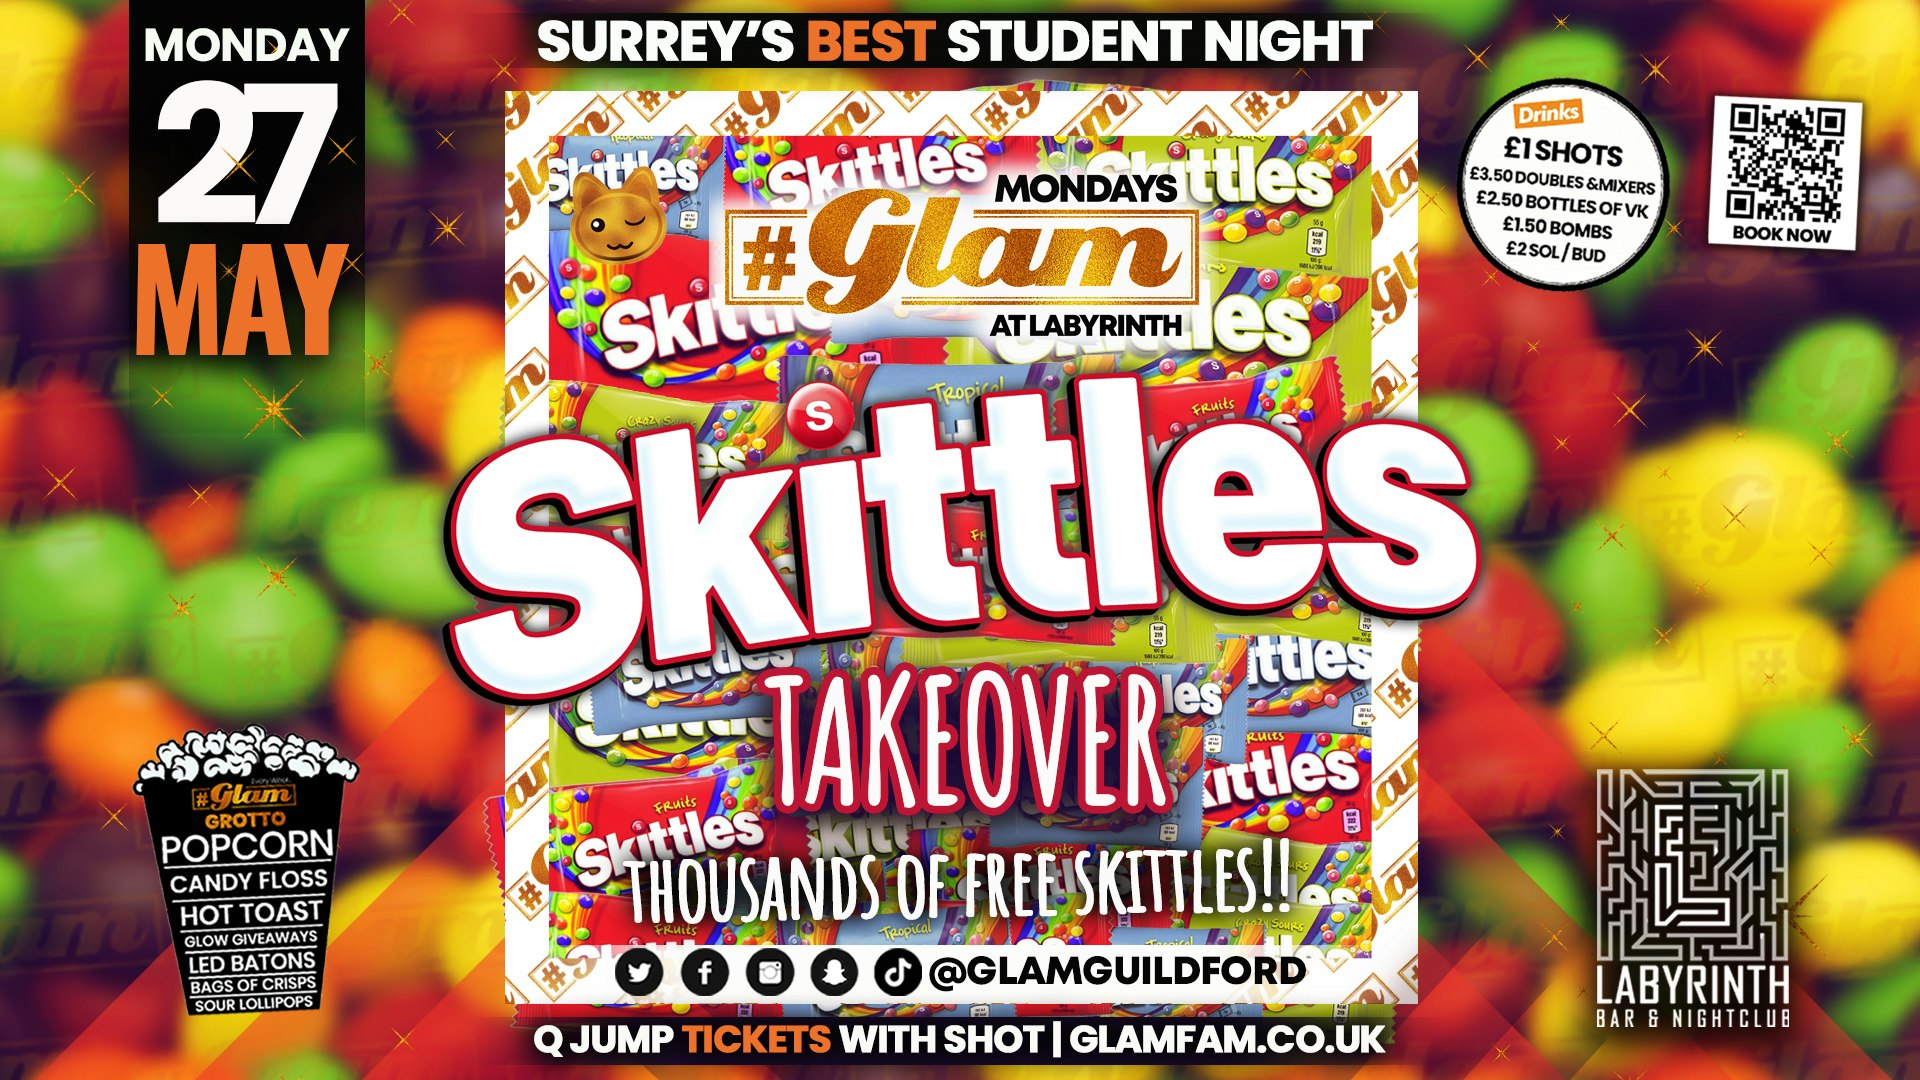 Glam – Surrey’s Best Student Events! ﻿SKITTLES TAKEOVER!! 🍬